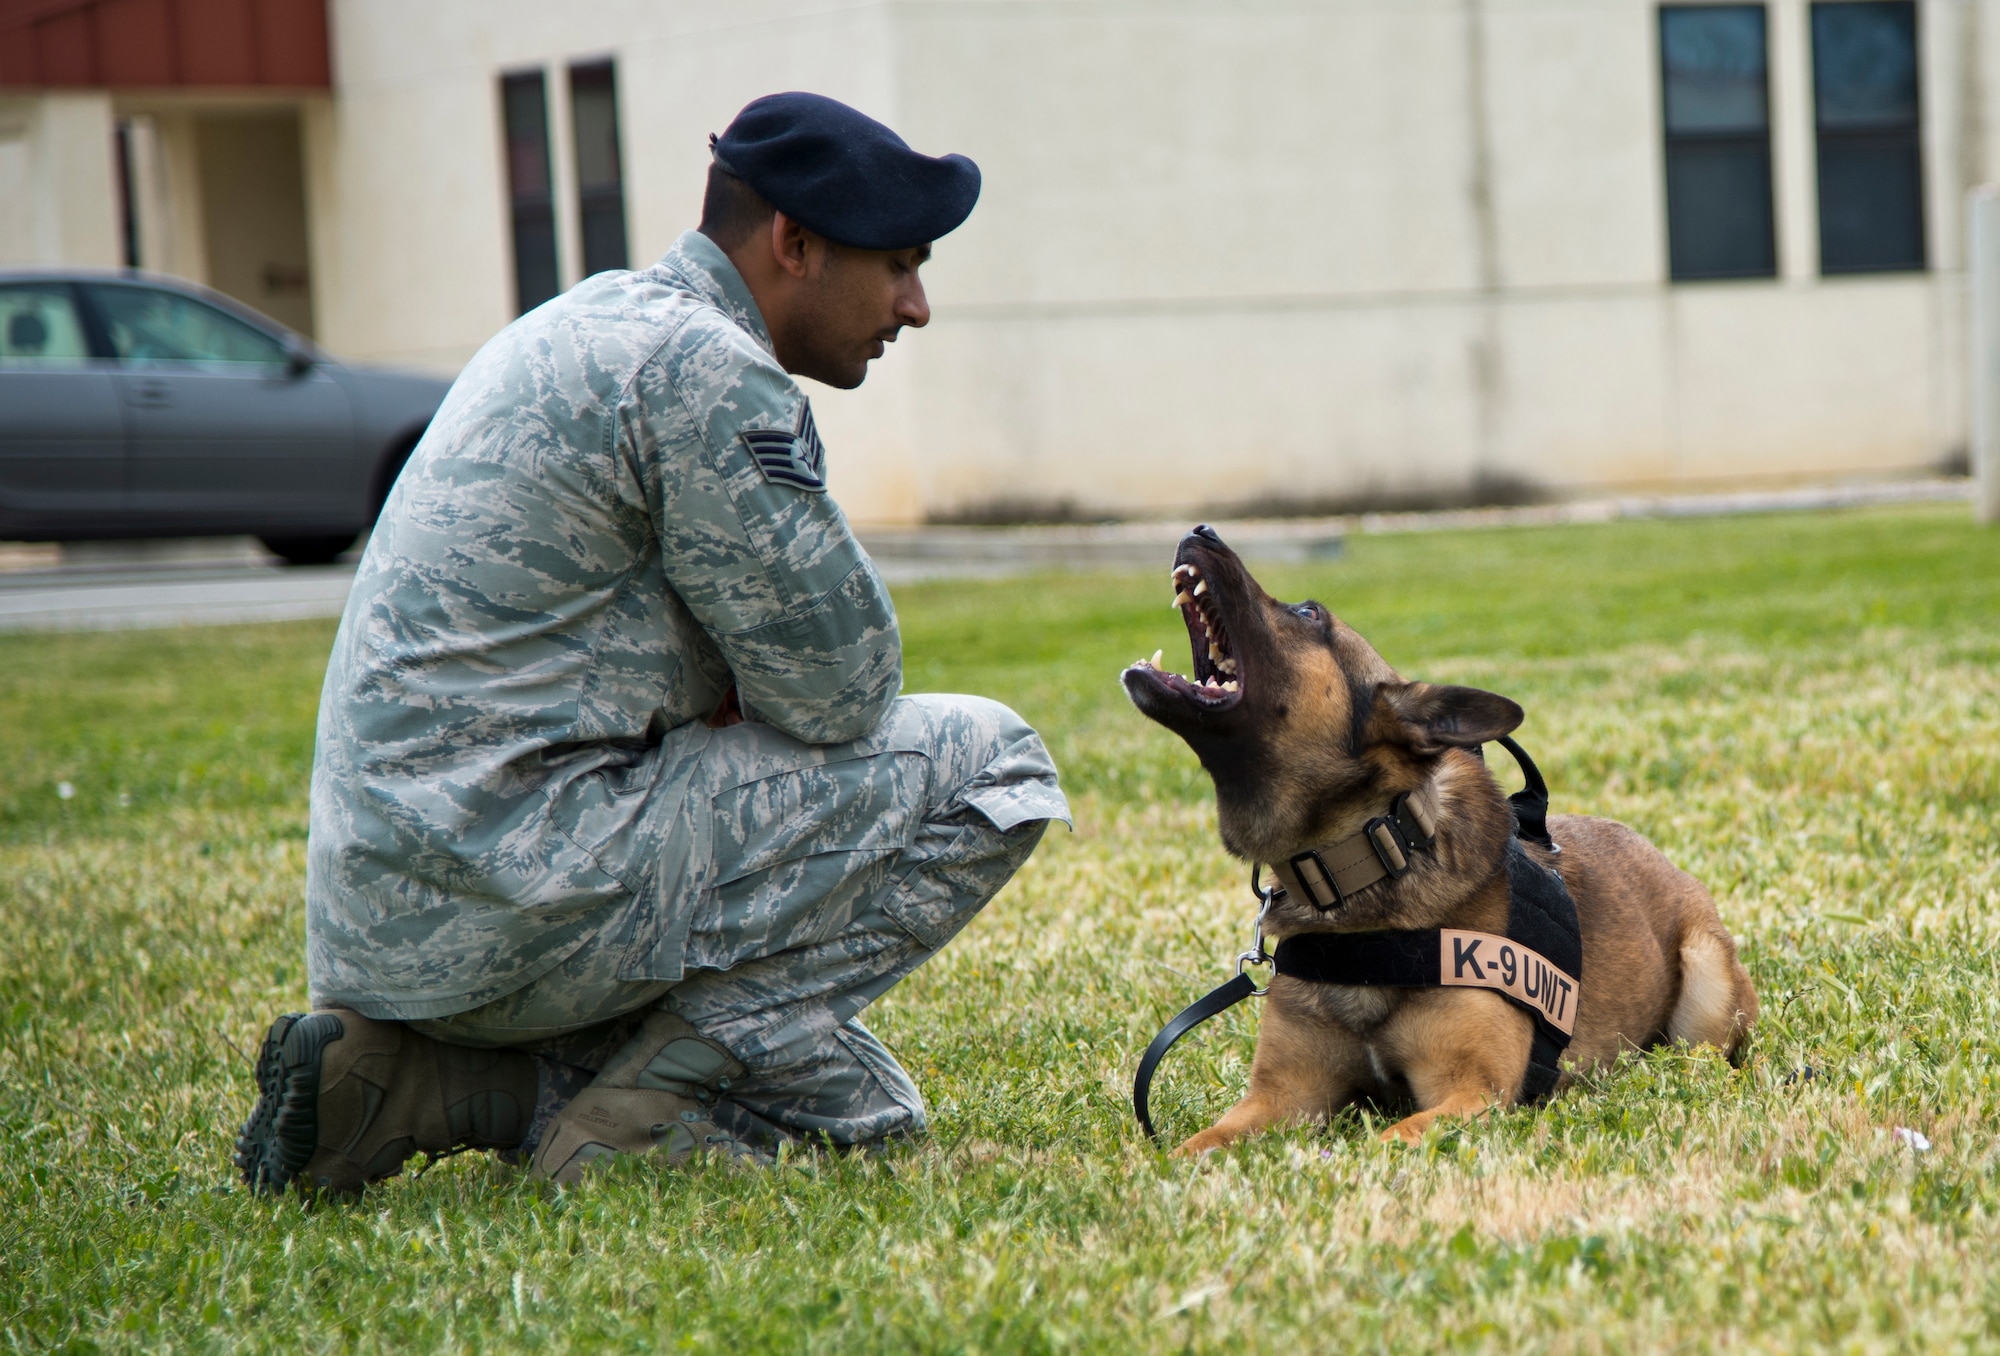 Borat, 60th Security Forces Military Working Dog, resists the urge to attack Senior Airman Andrew Hanus, 60th SFS MWD handler and "bad guy", as his handler, Staff Sgt. Zahir Mohammed, 60th SFS MWD handler, goes through basic obedience commands with him that they will be tested on during the 2014 Defenders K9 Trials. (U.S. Air Force photo/Senior Airman Nicole Leidholm)